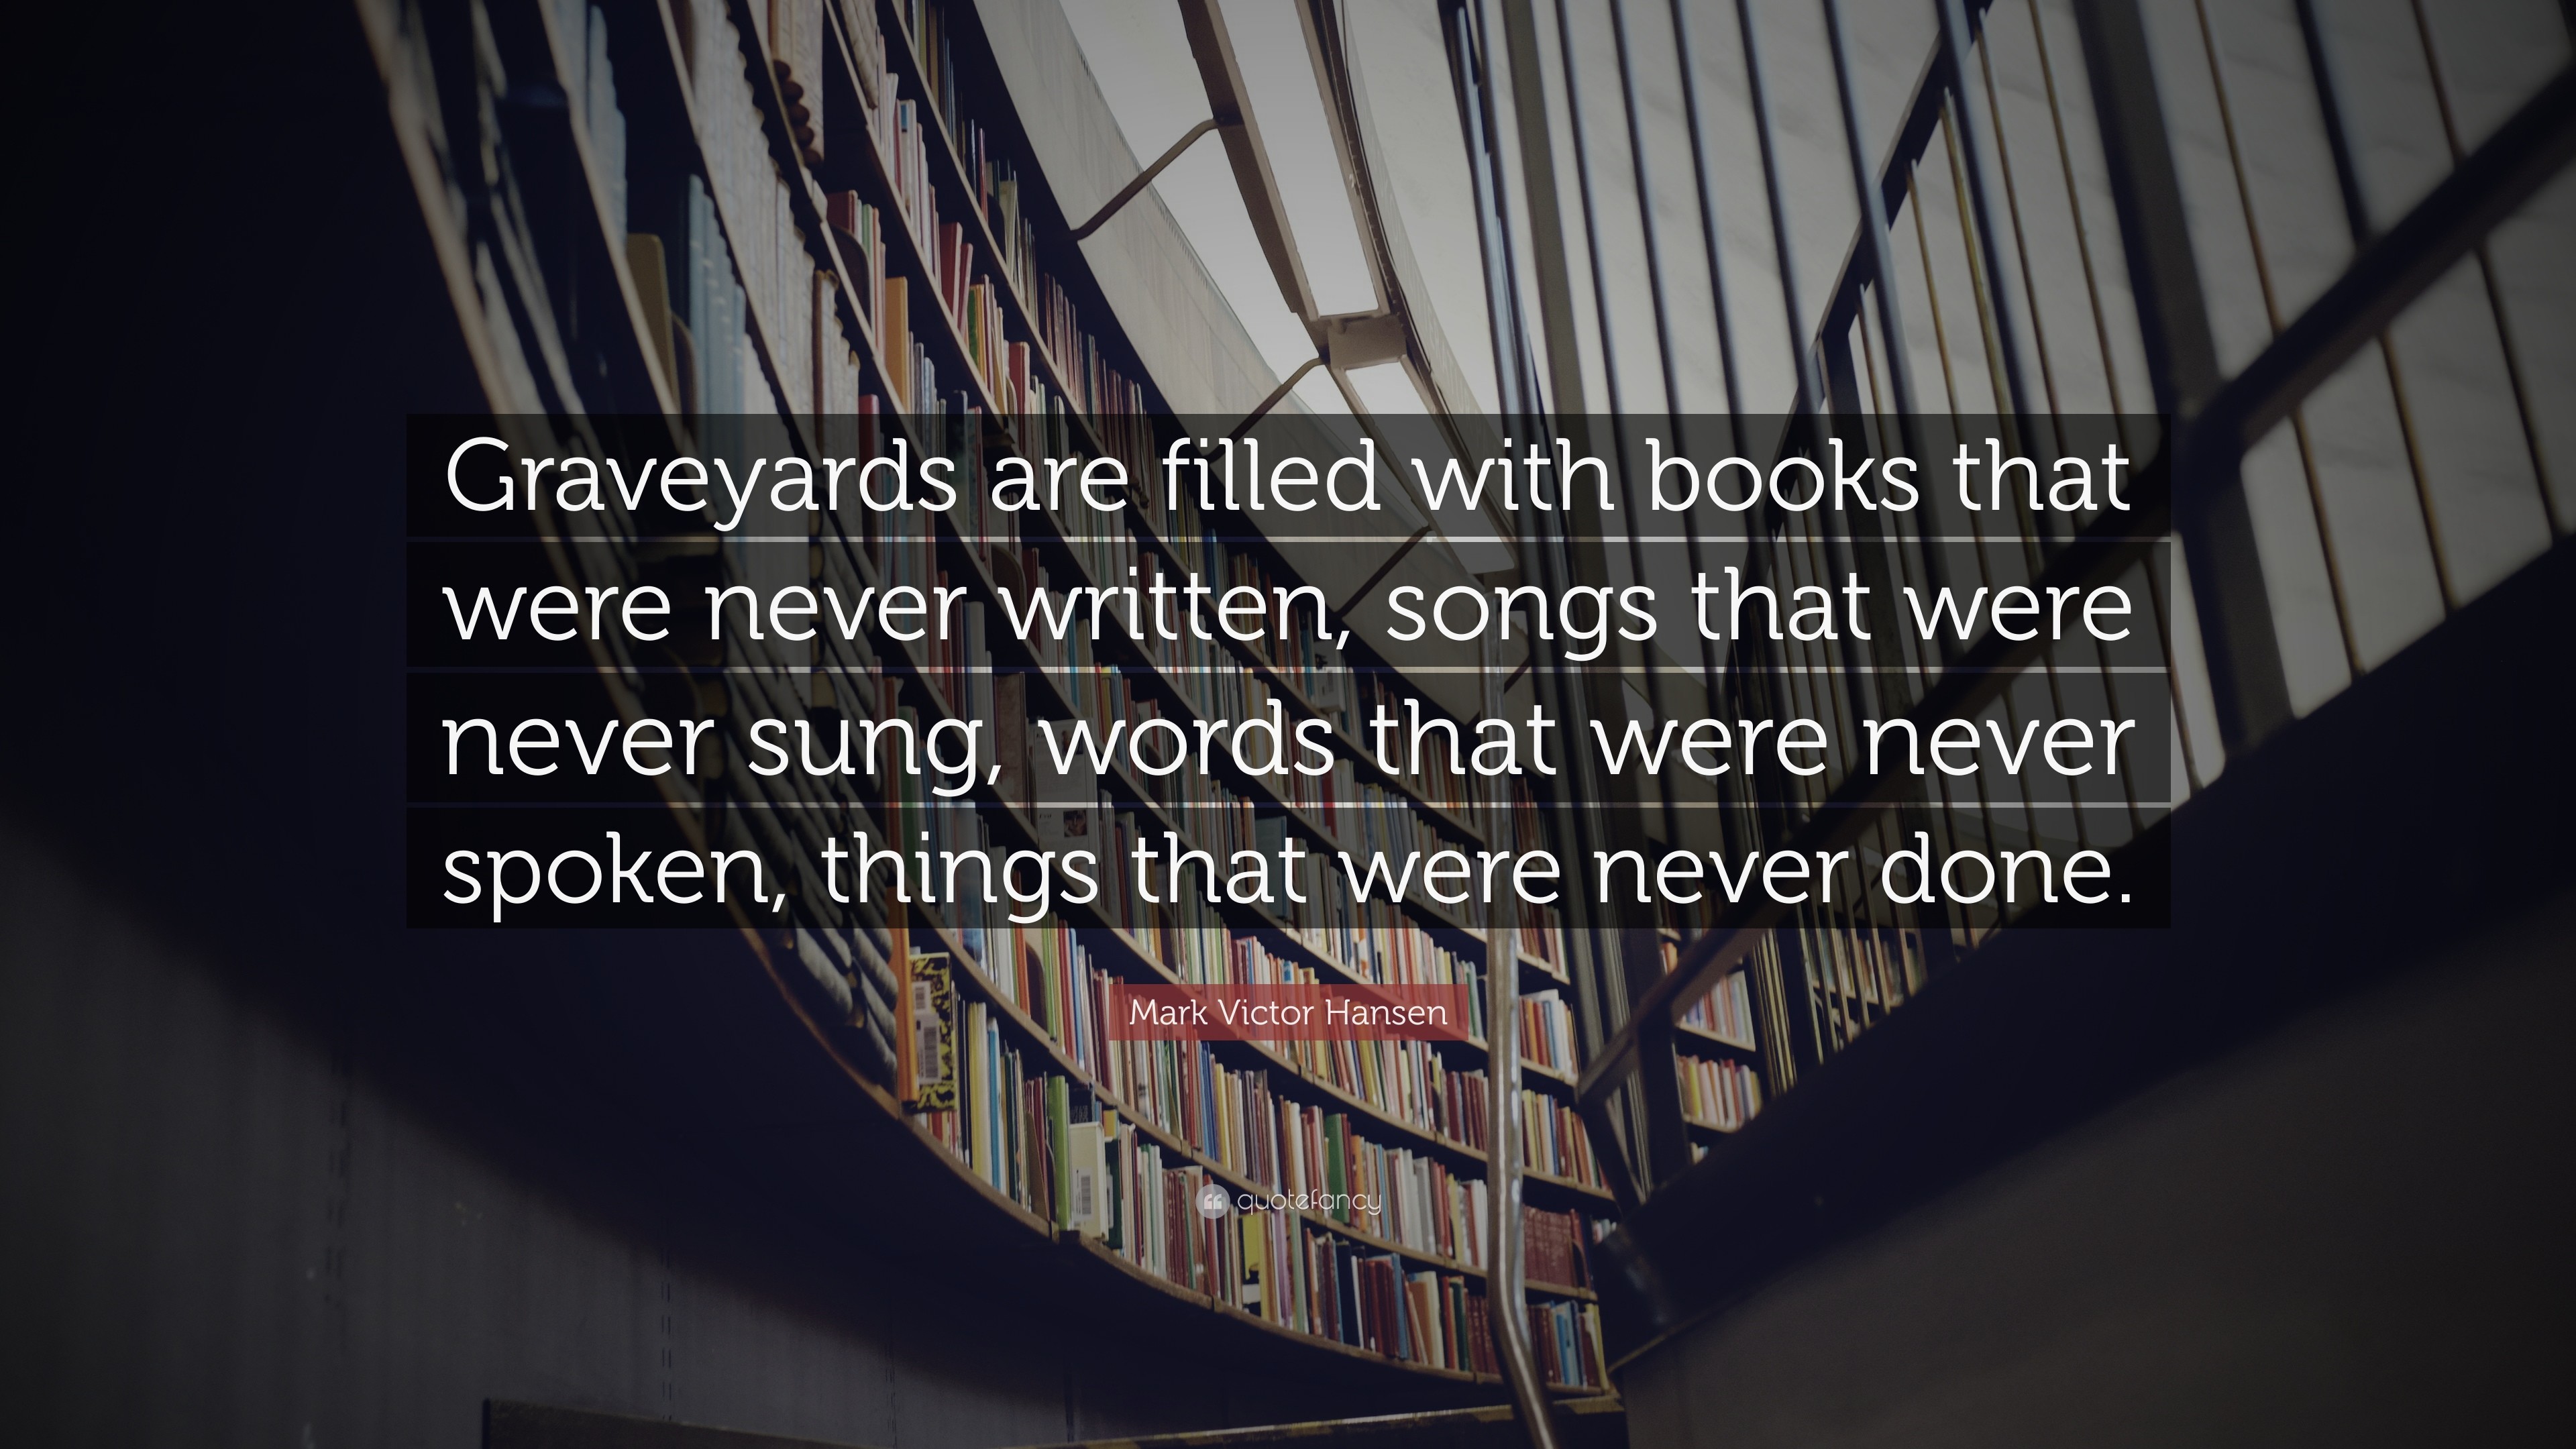 3840x2160 Mark Victor Hansen Quote: “Graveyards are filled with books that were never  written,